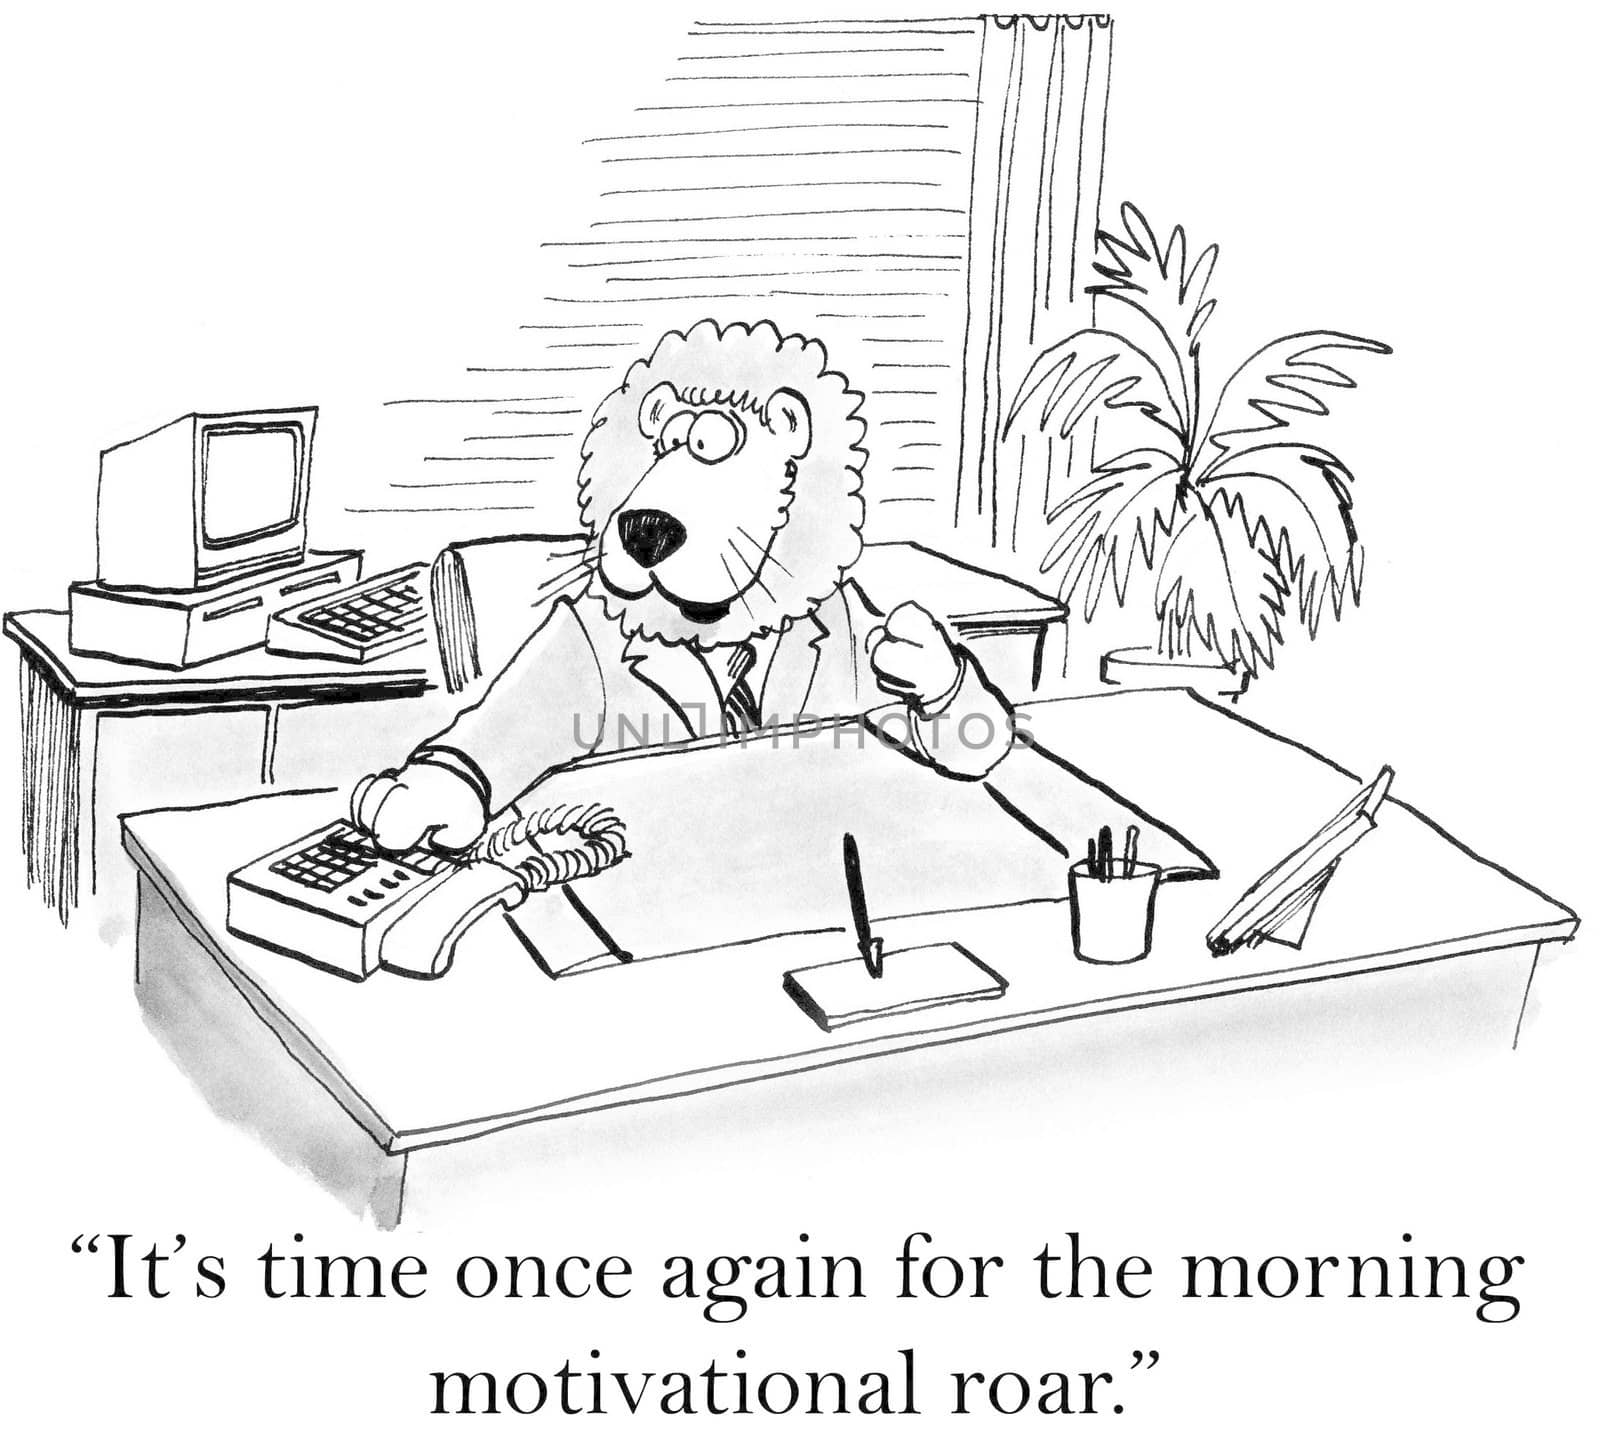 "It's time once gain for the morning motivational roar."